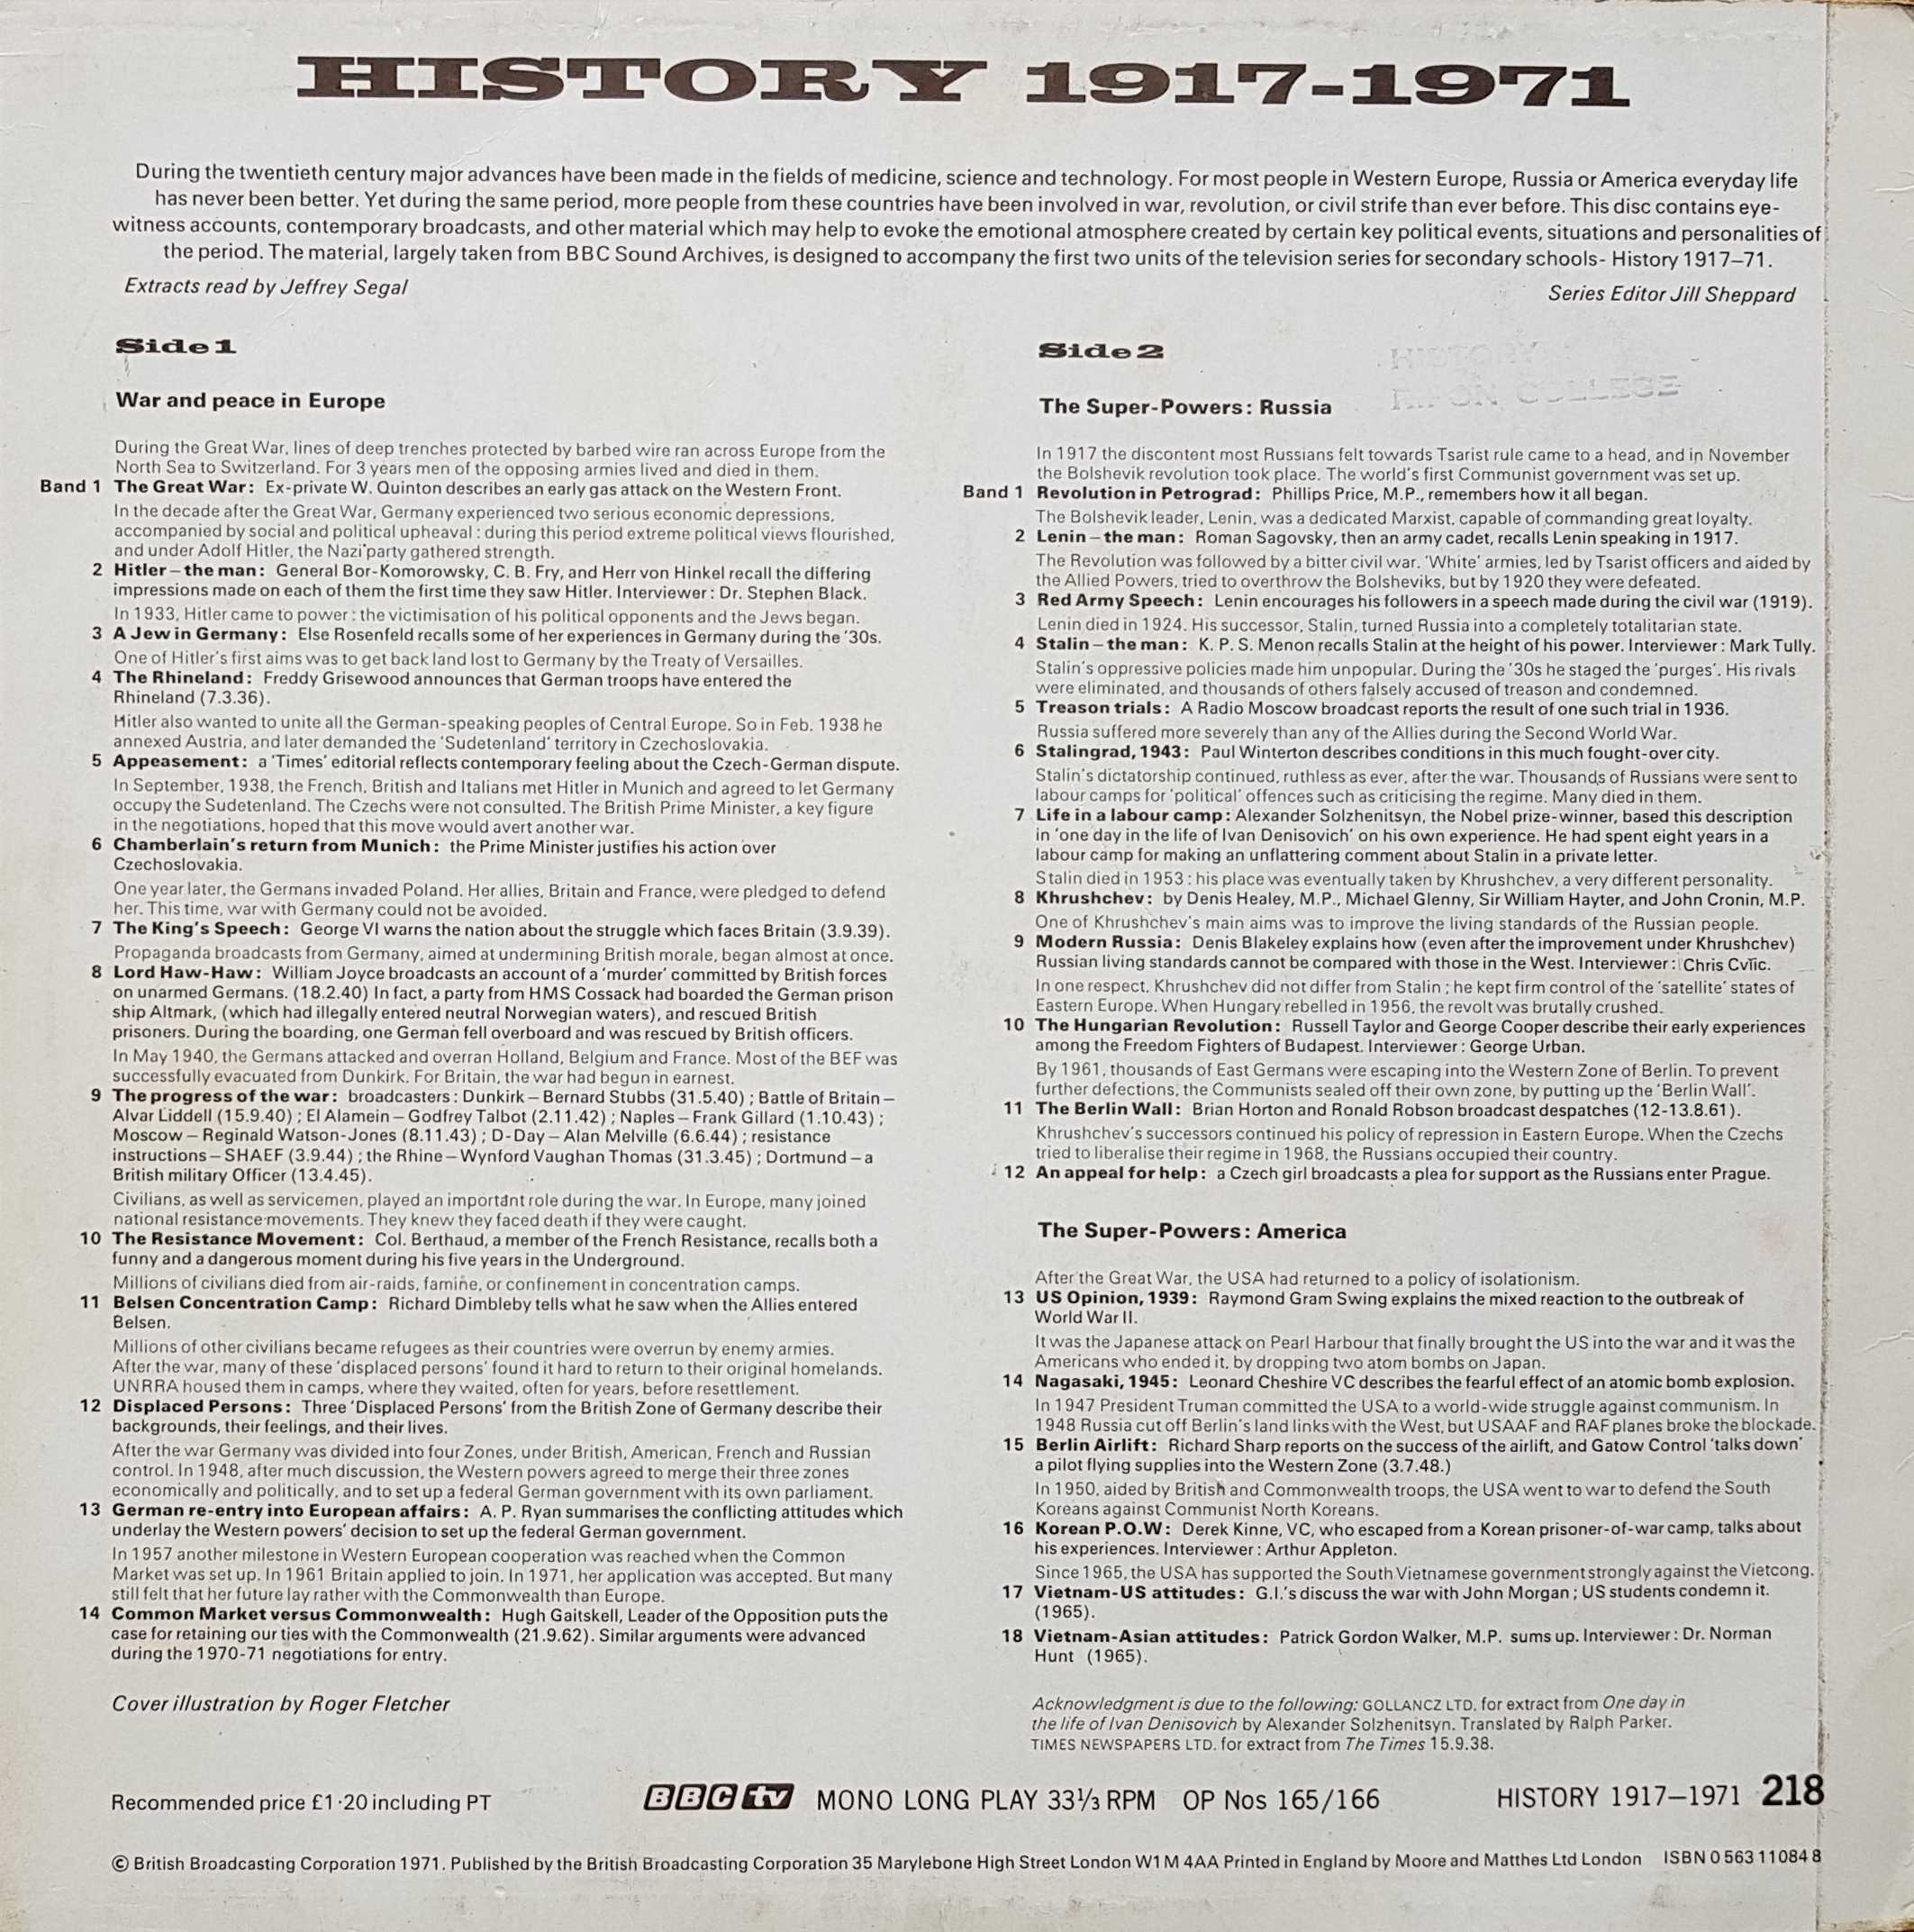 Picture of OP 165/166 History 1917-1971 - War and peace in Europe by artist Various from the BBC records and Tapes library